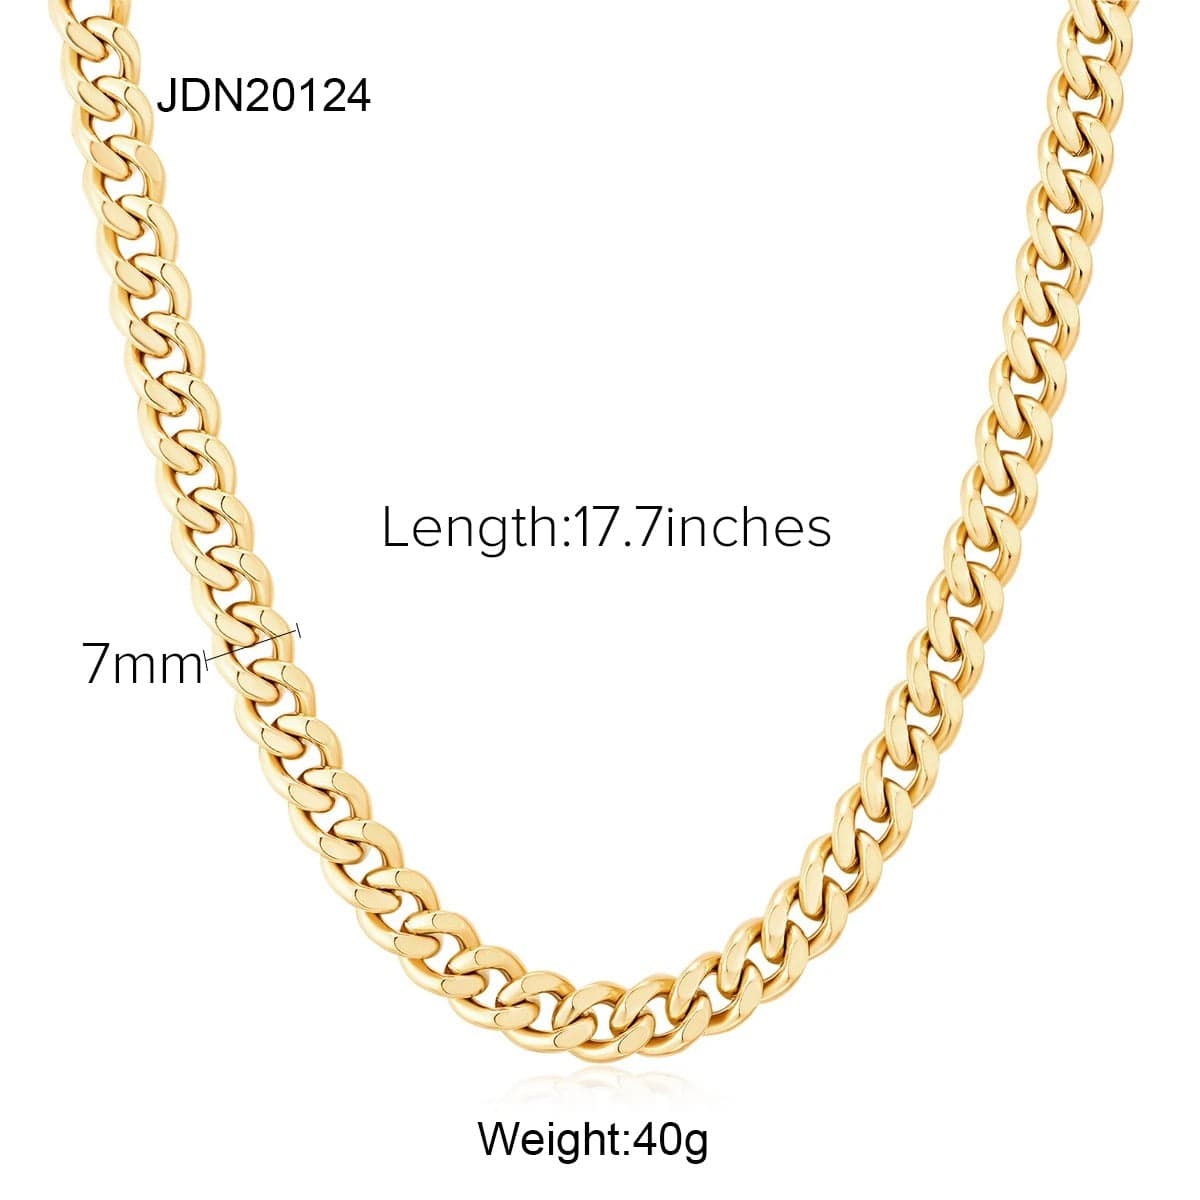 Renee Chain Necklace